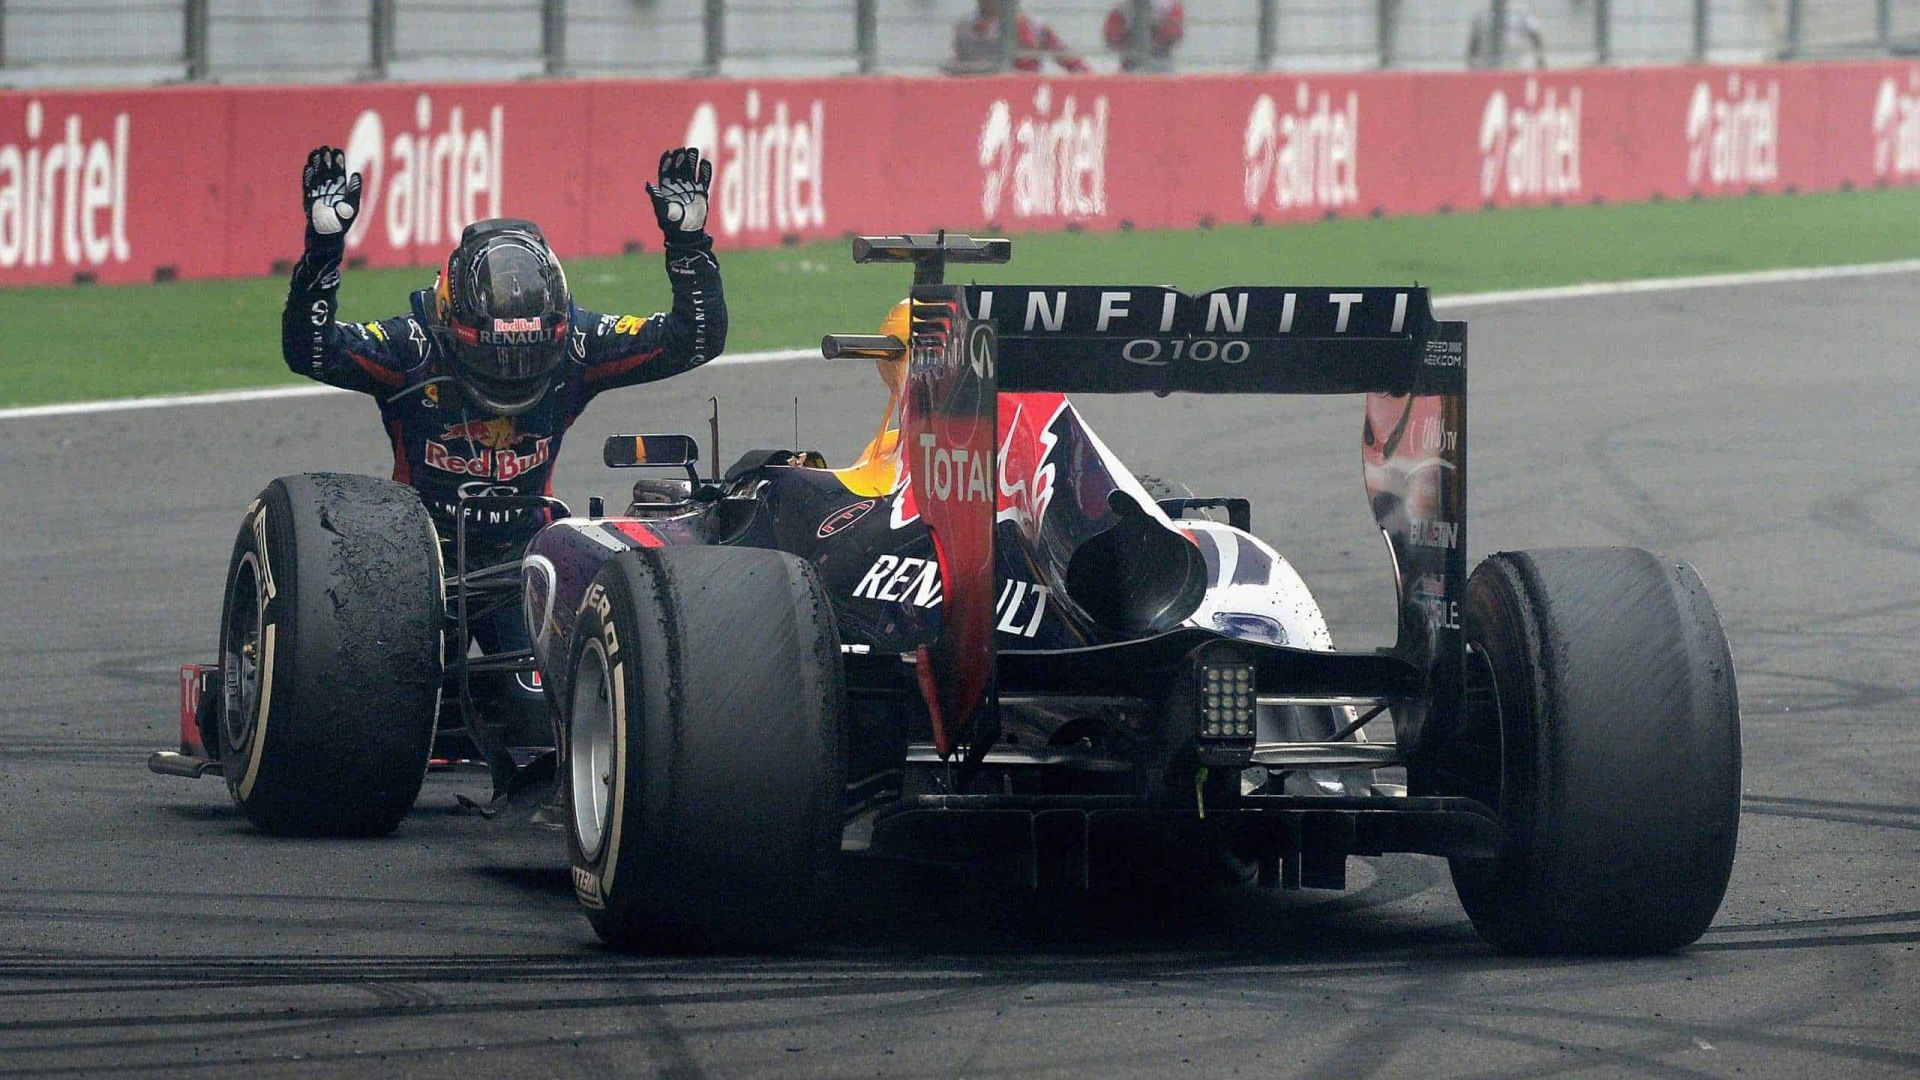 NOIDA, INDIA - OCTOBER 27:  Race winner and 2013 Formula One World Champion Sebastian Vettel of Germany and Infiniti Red Bull Racing celebrates in front of the crowd on the main straight following the Indian Formula One Grand Prix at Buddh International Circuit on October 27, 2013 in Noida, India.  (Photo by Getty Images/Getty Images) *** Local Caption *** Sebastian Vettel // Getty Images / Red Bull Content Pool  // SI201412181287 // Usage for editorial use only //